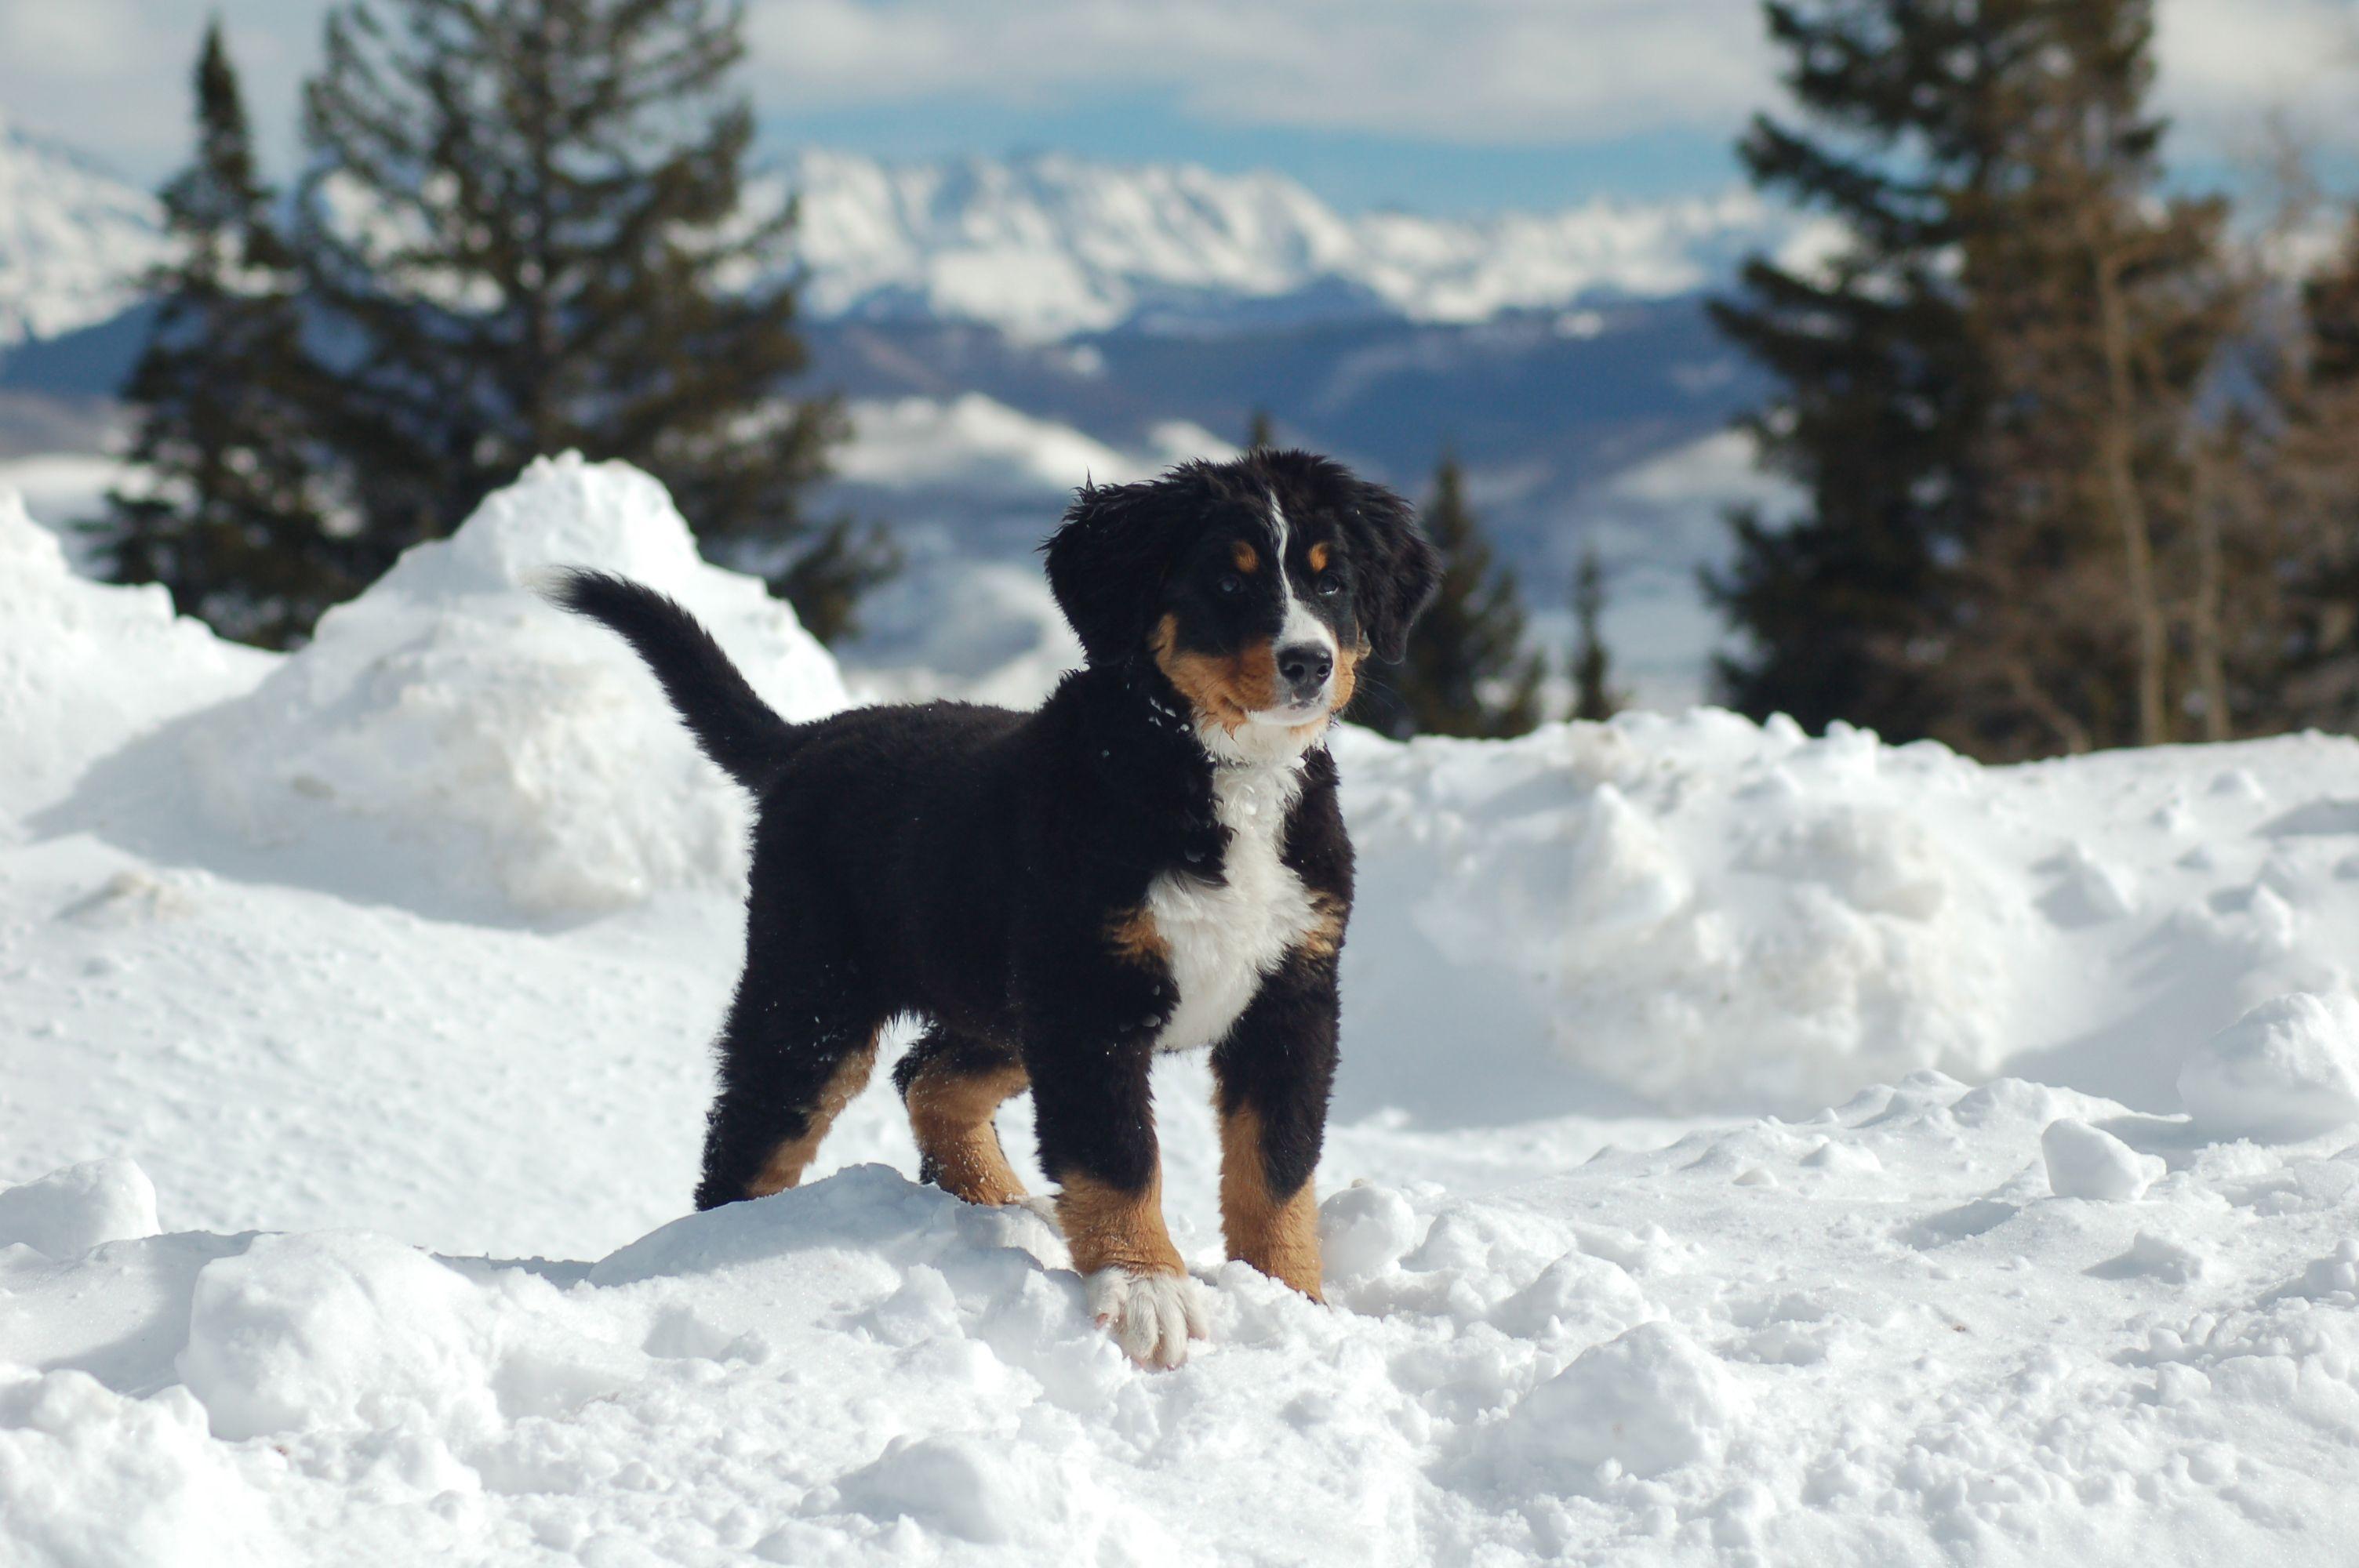 Bernese Mountain dog puppy in the snow wallpaper and image